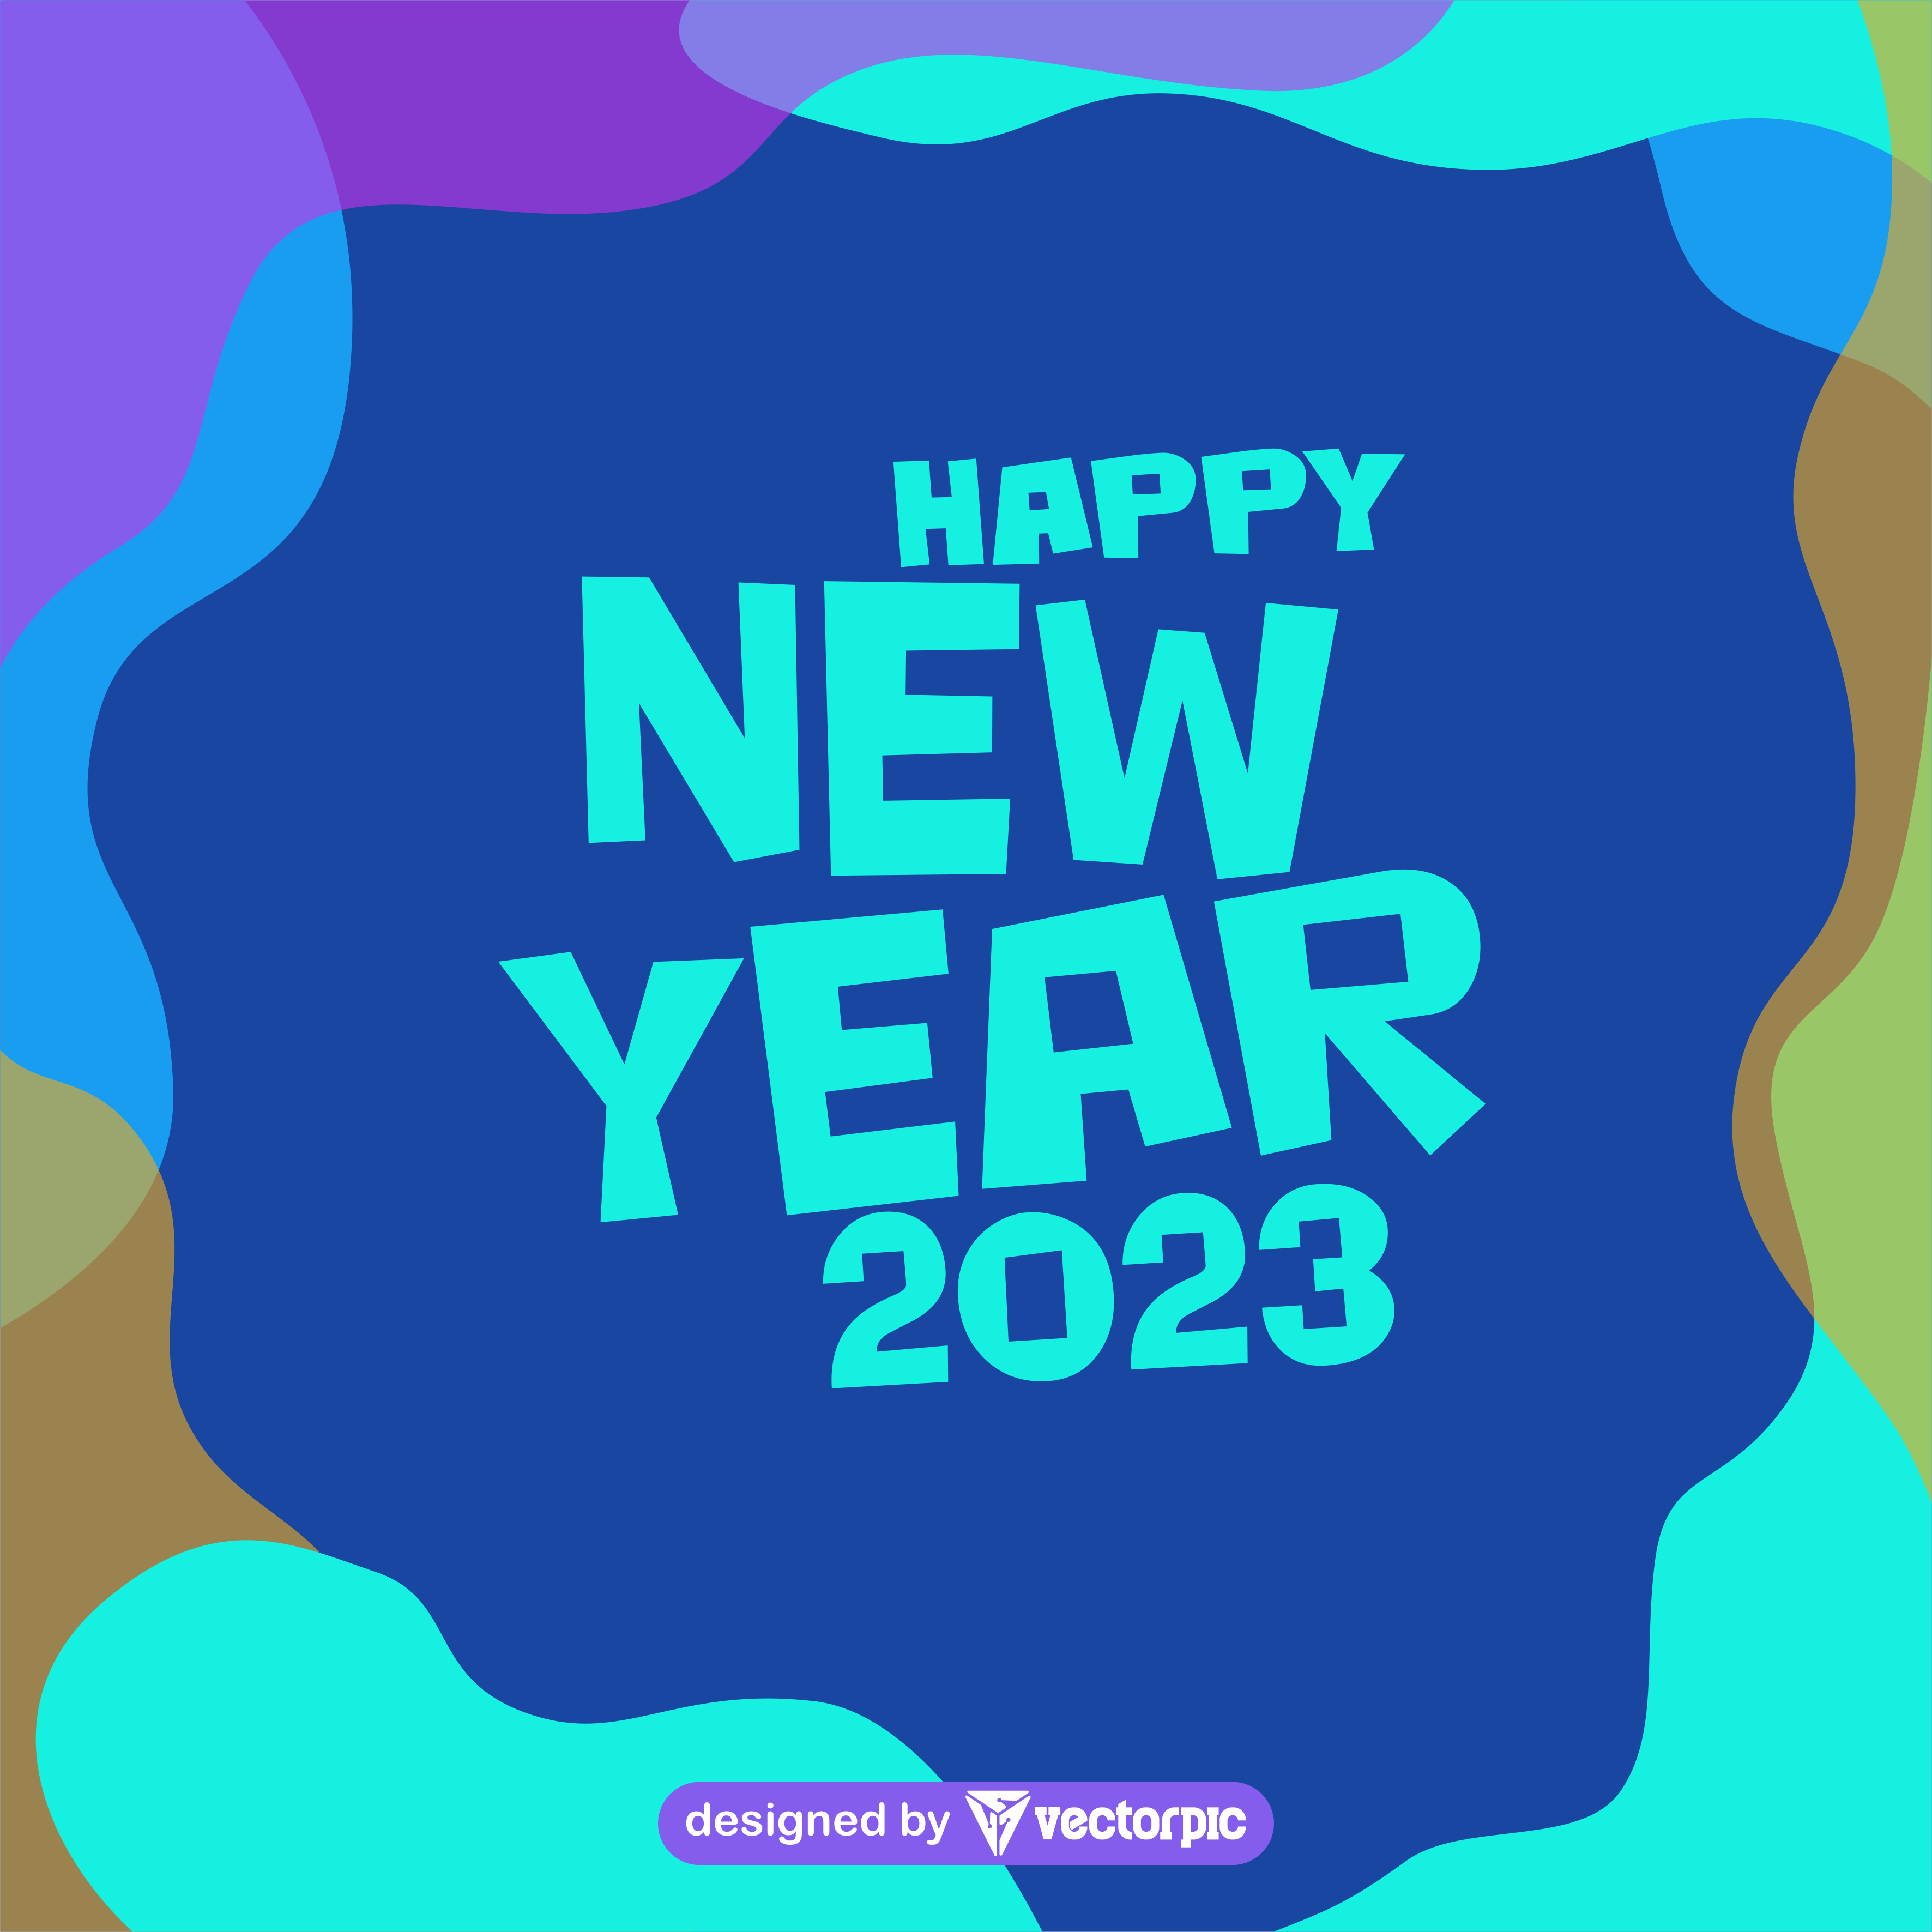 happy new year 2023 background design free vector